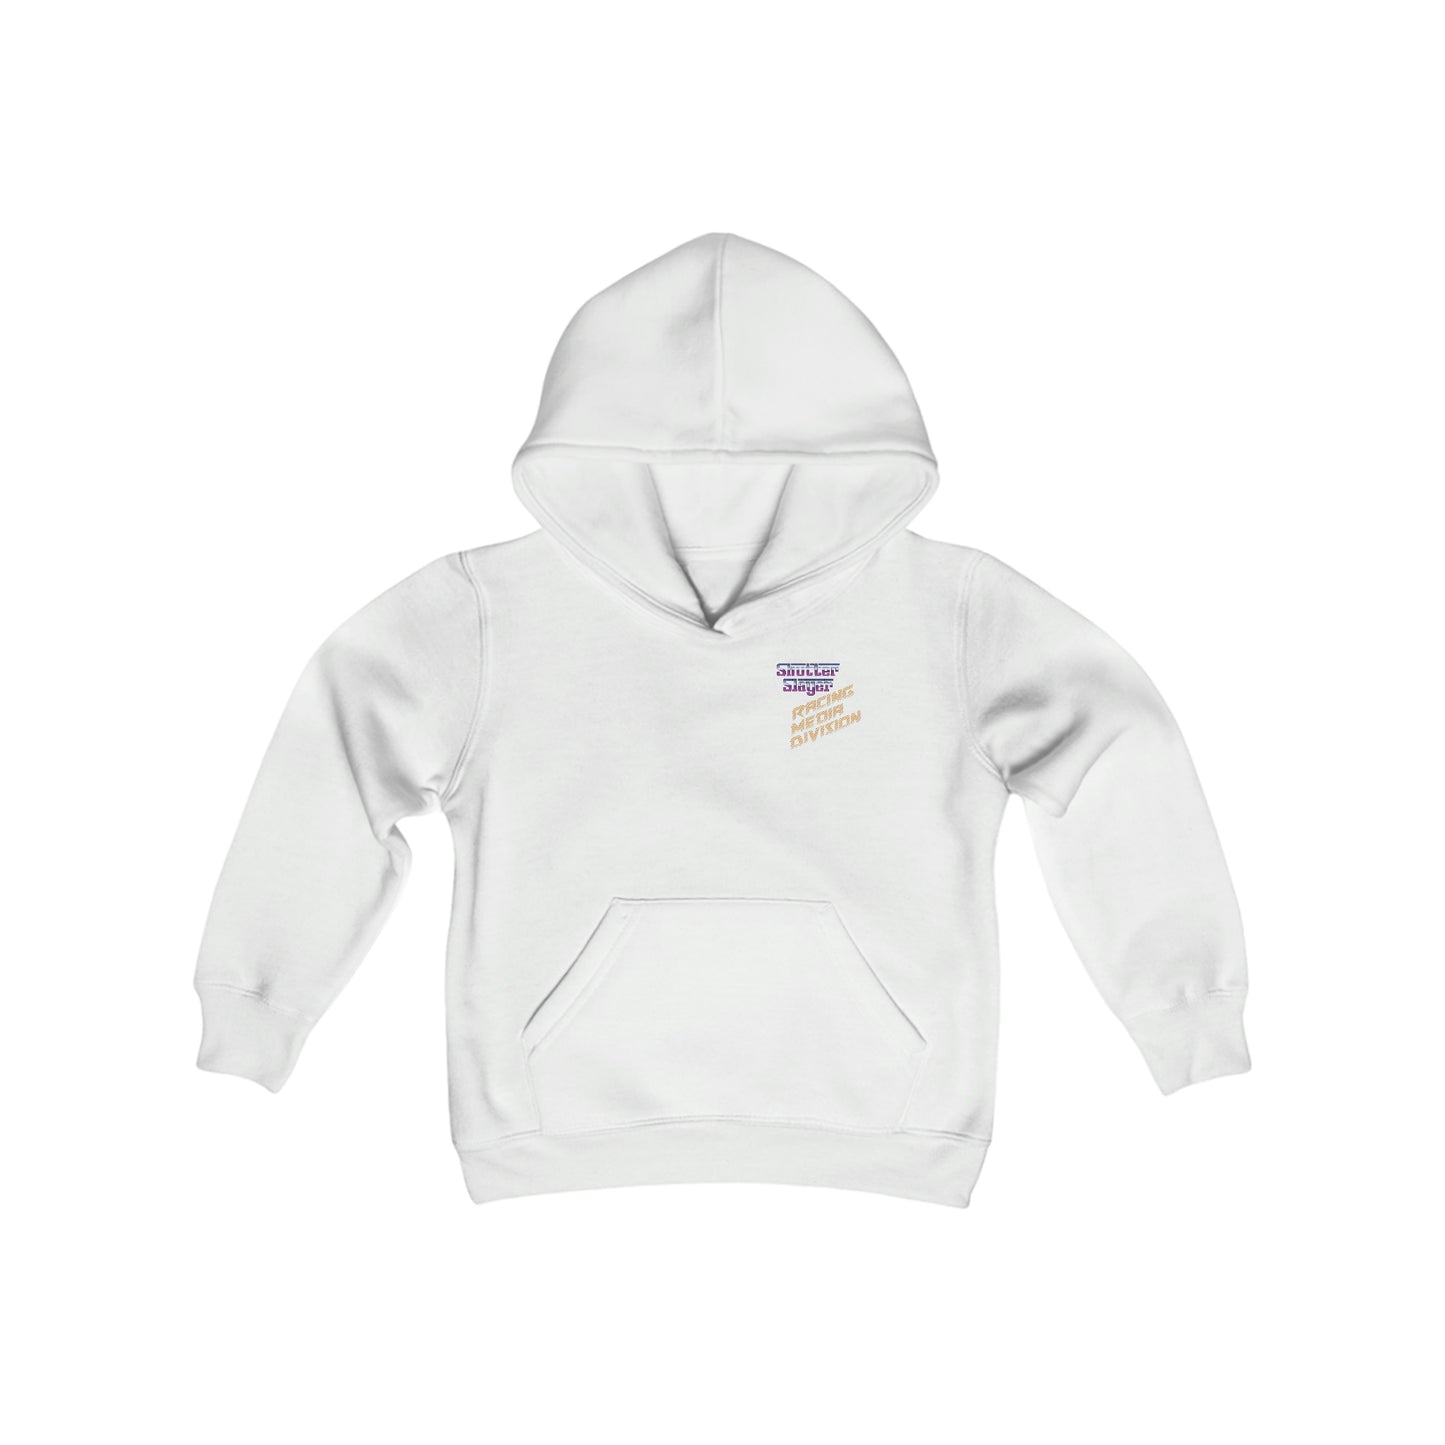 Child Size - ShutterSlayer Racing Media Division Hoodie